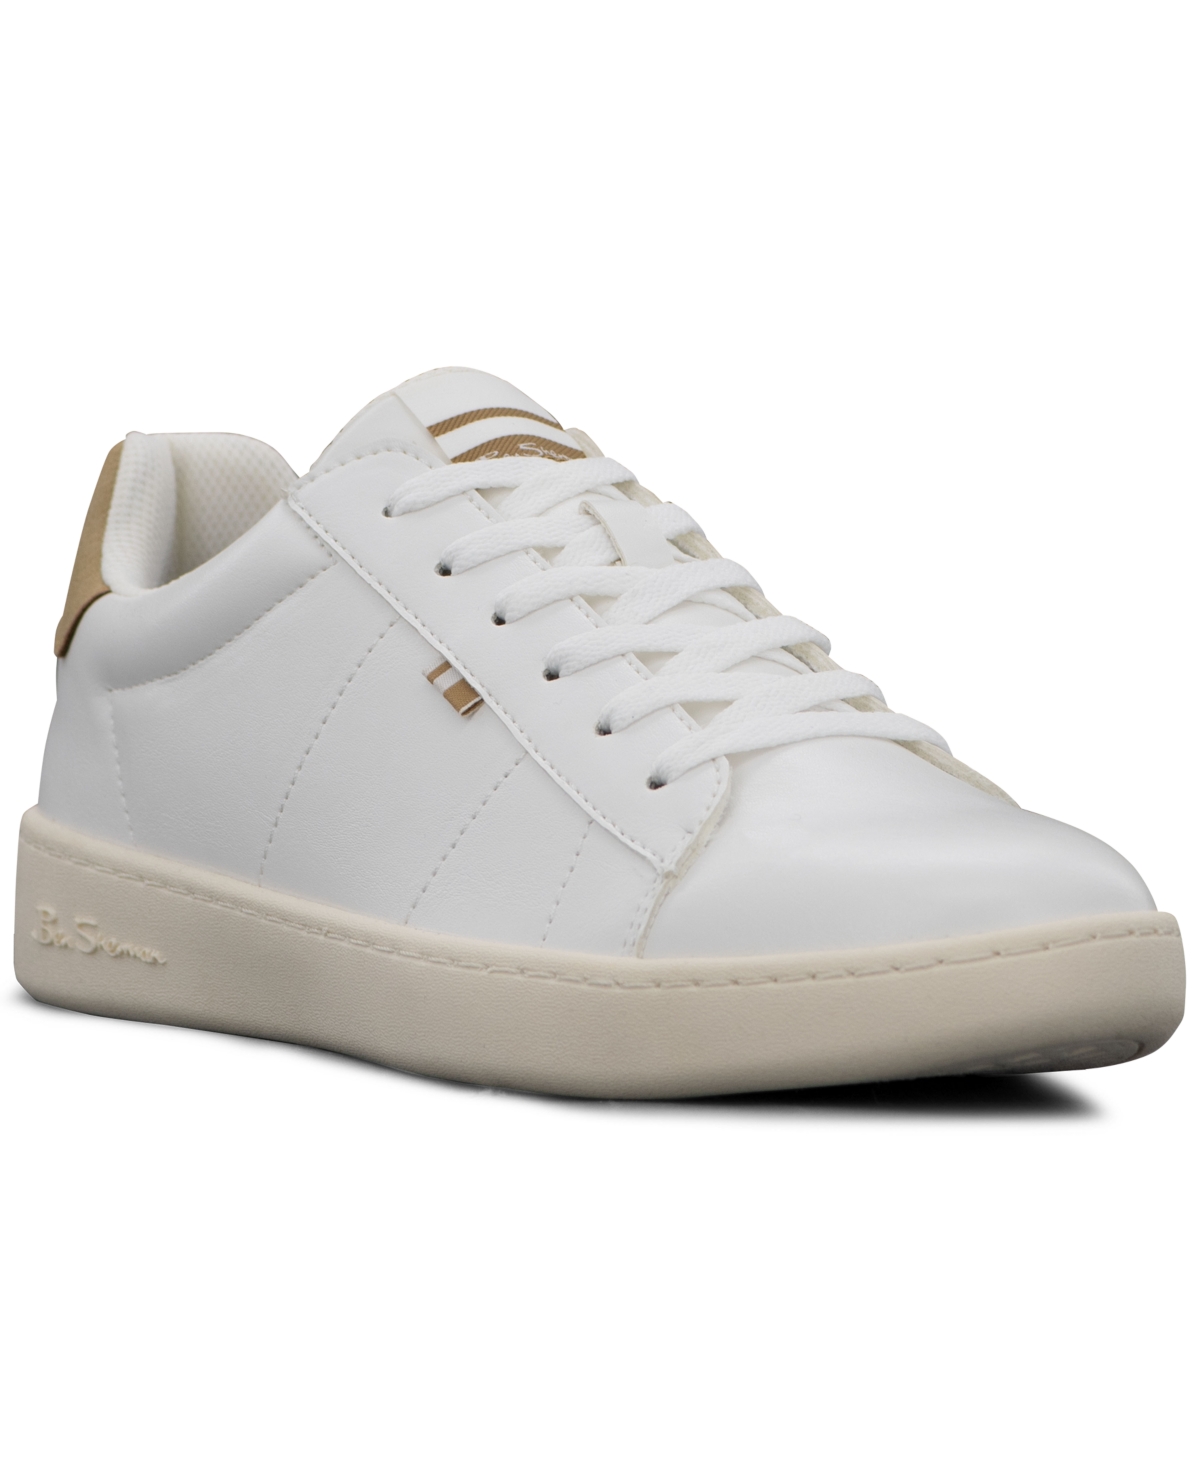 Men's Hampton Low Court Casual Sneakers from Finish Line - White/Tan